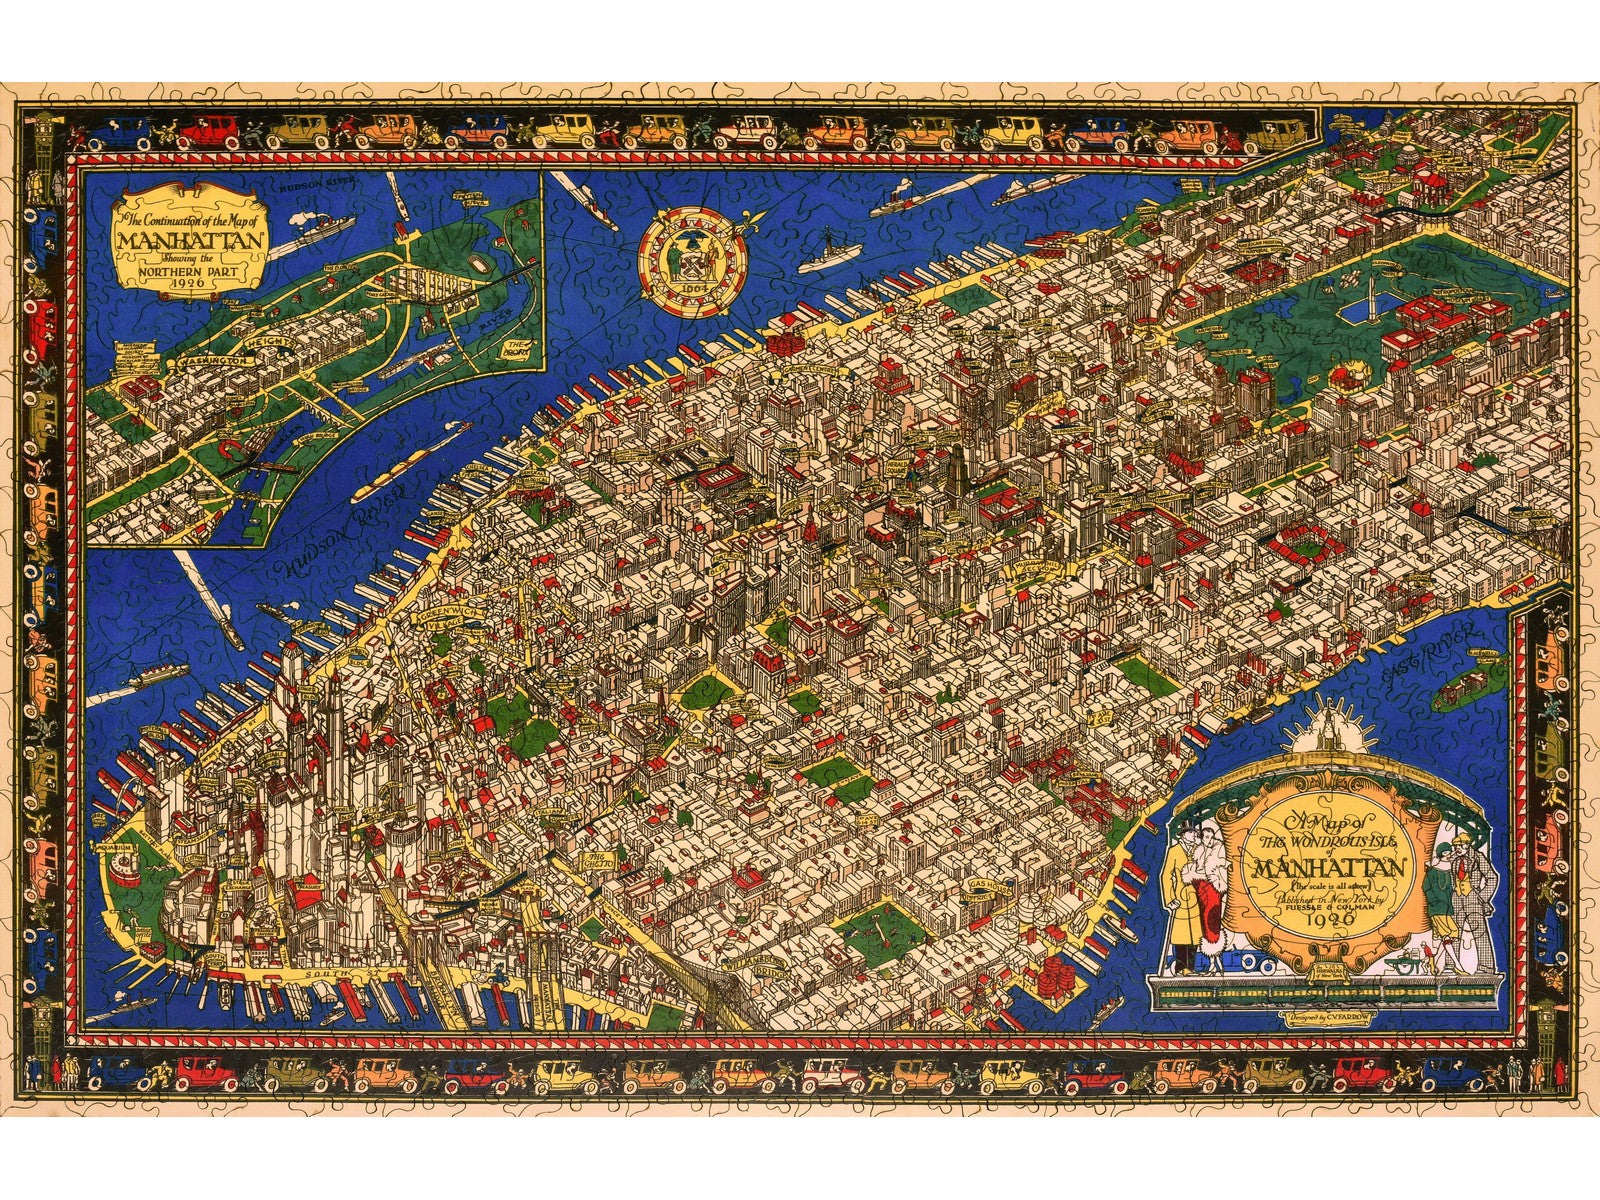 The front of the puzzle, The Wondrous Isle of Manhattan, which shows a vintage map of New York.